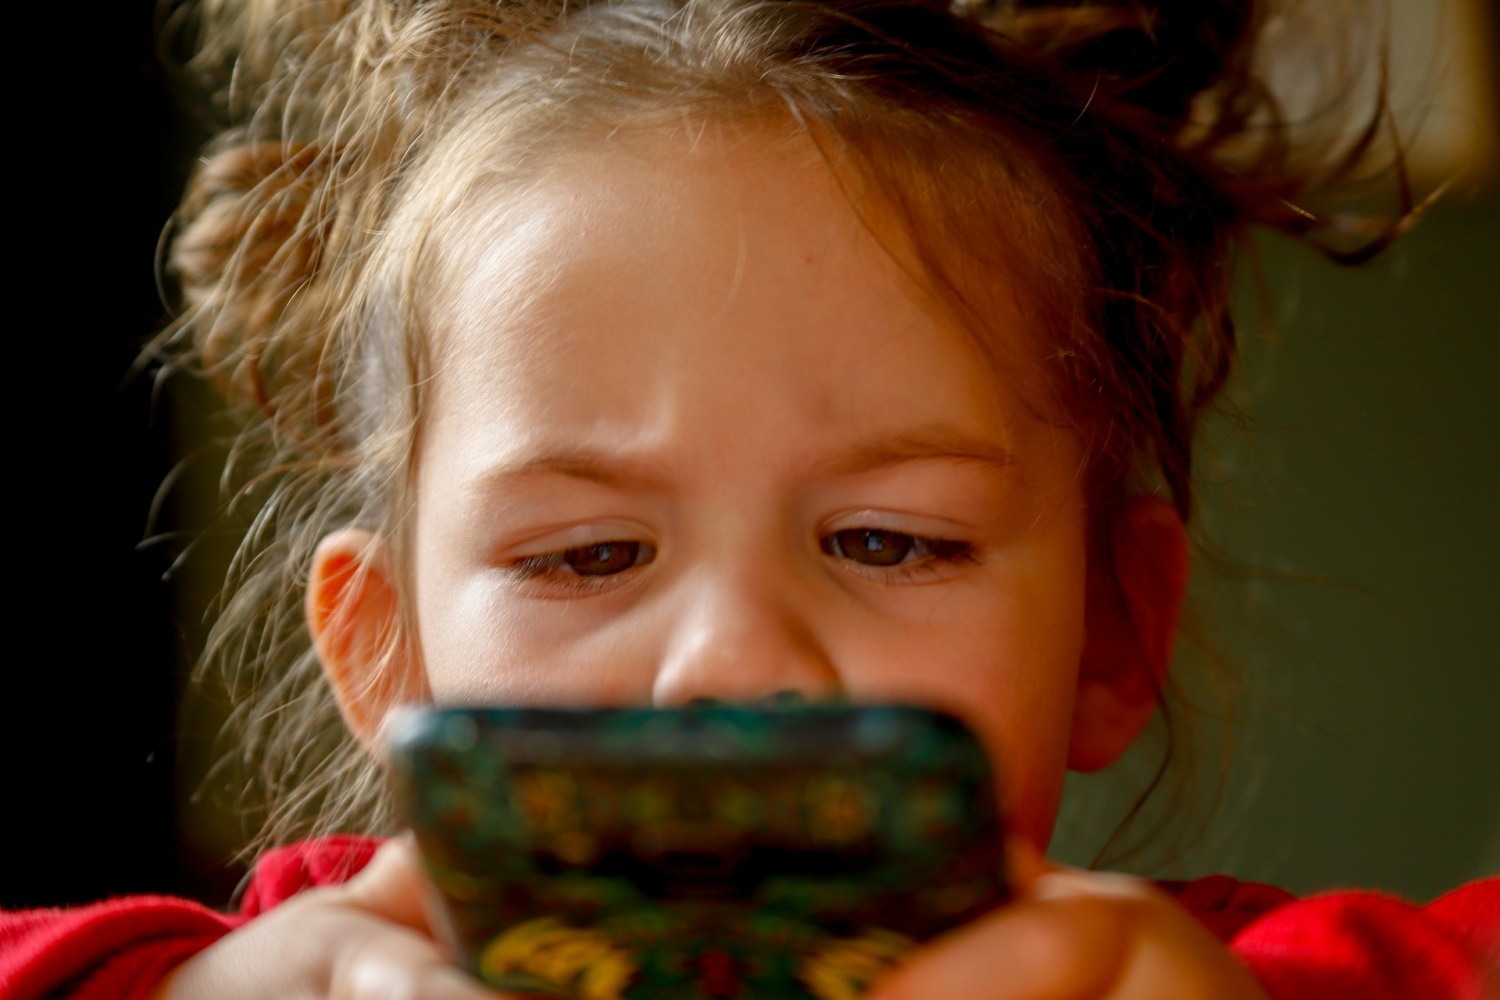 Does Social Media Really Cause Depression in Children? New Study Has an Answer